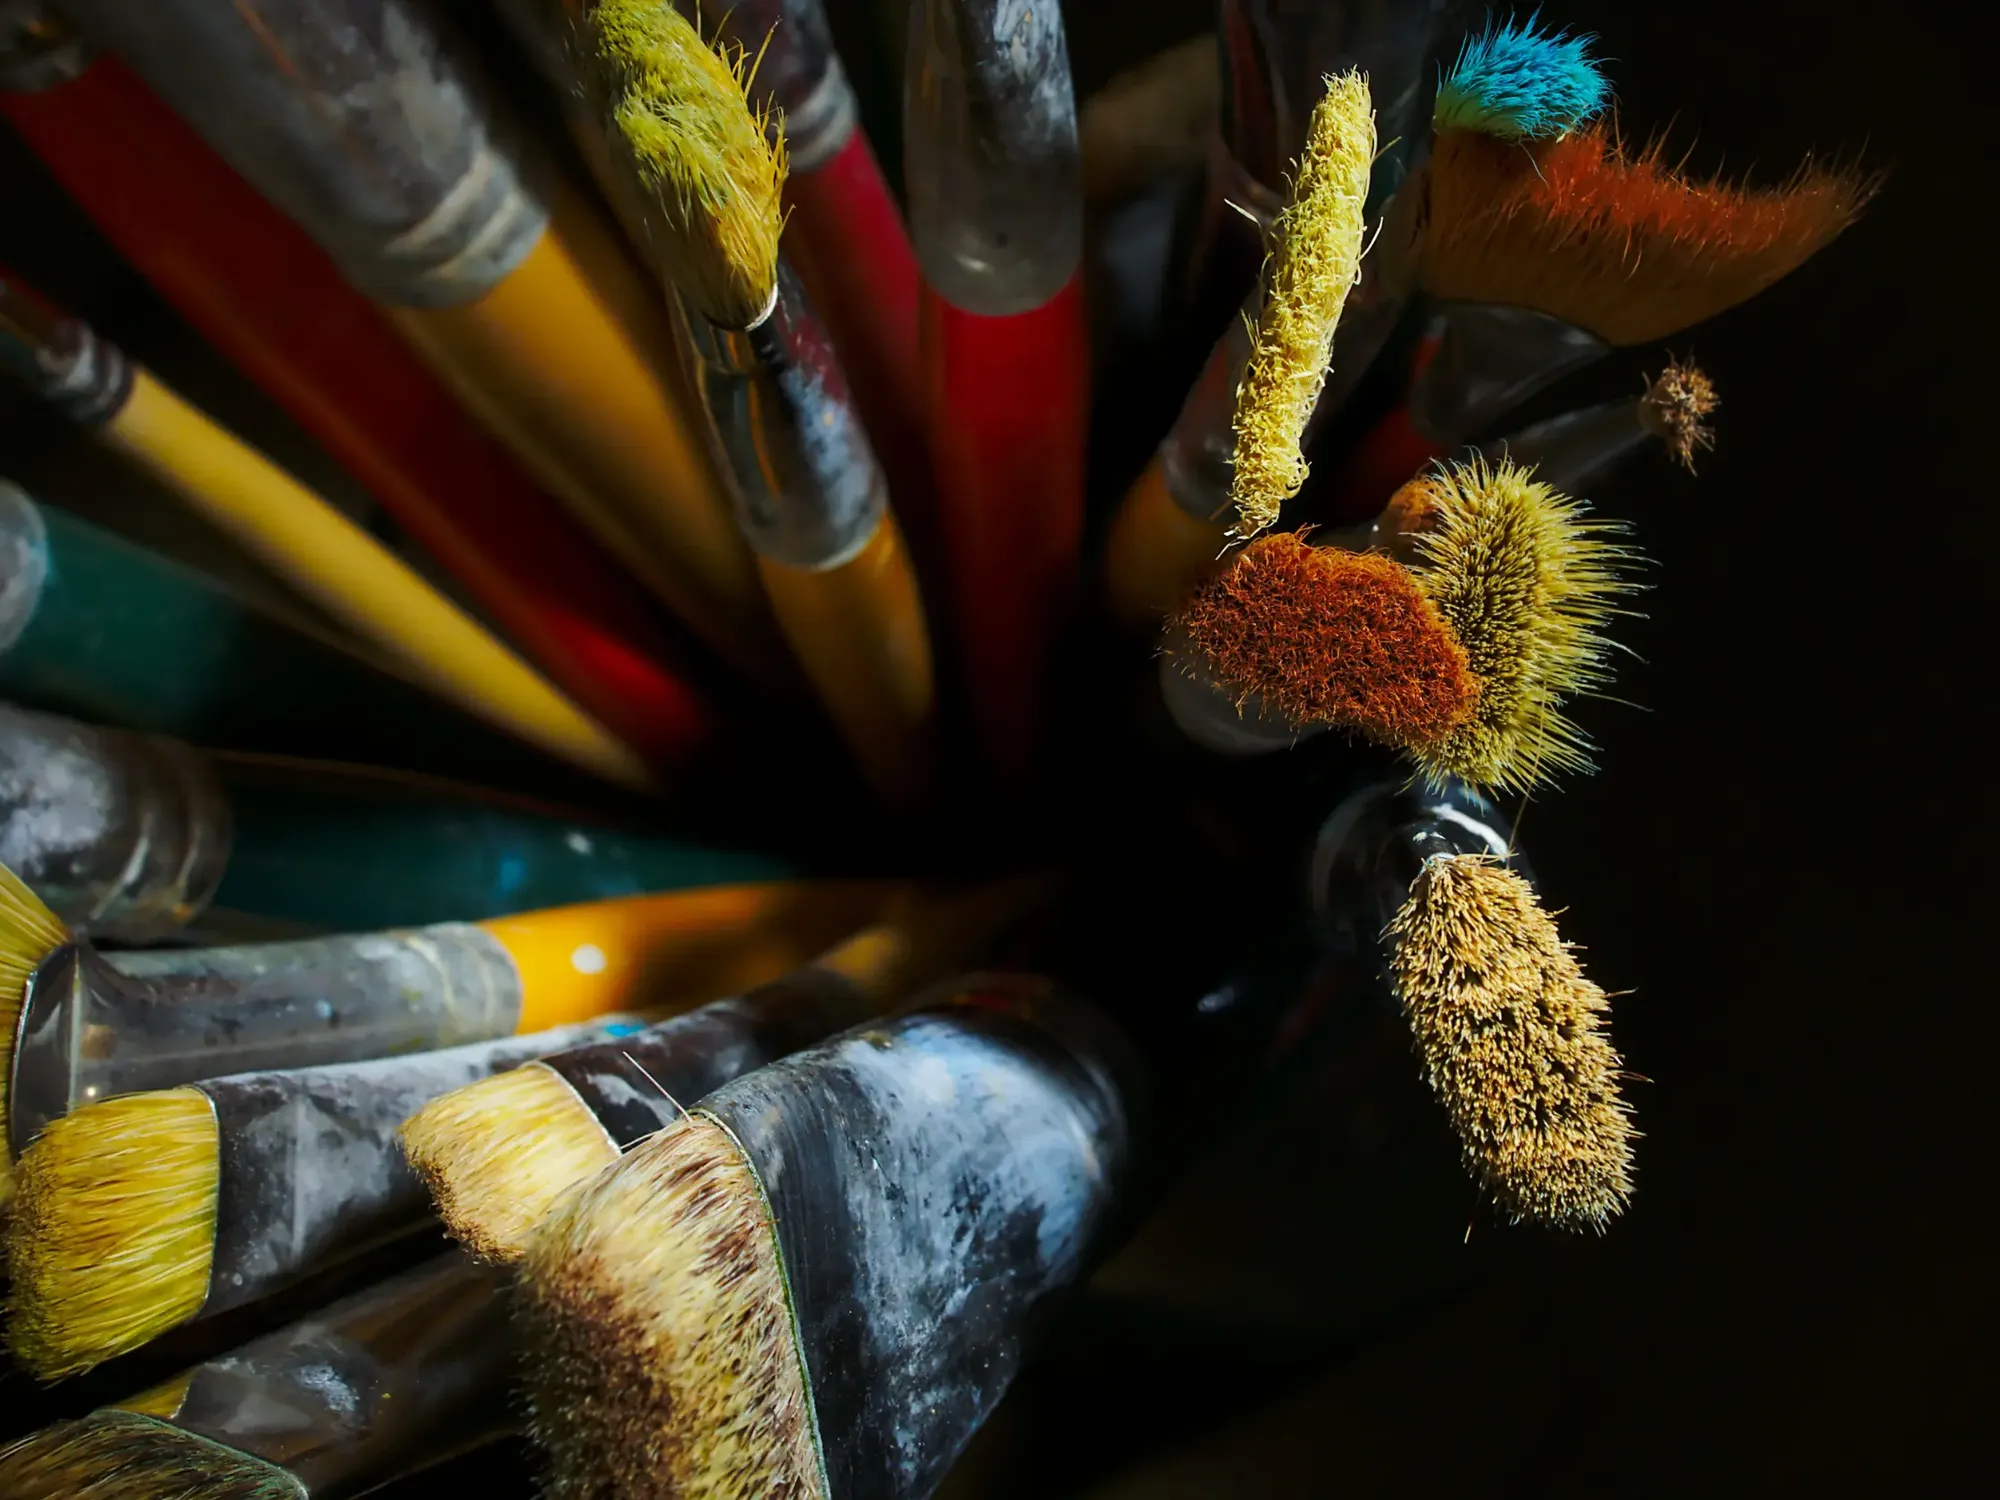 paintbrushes of different colors